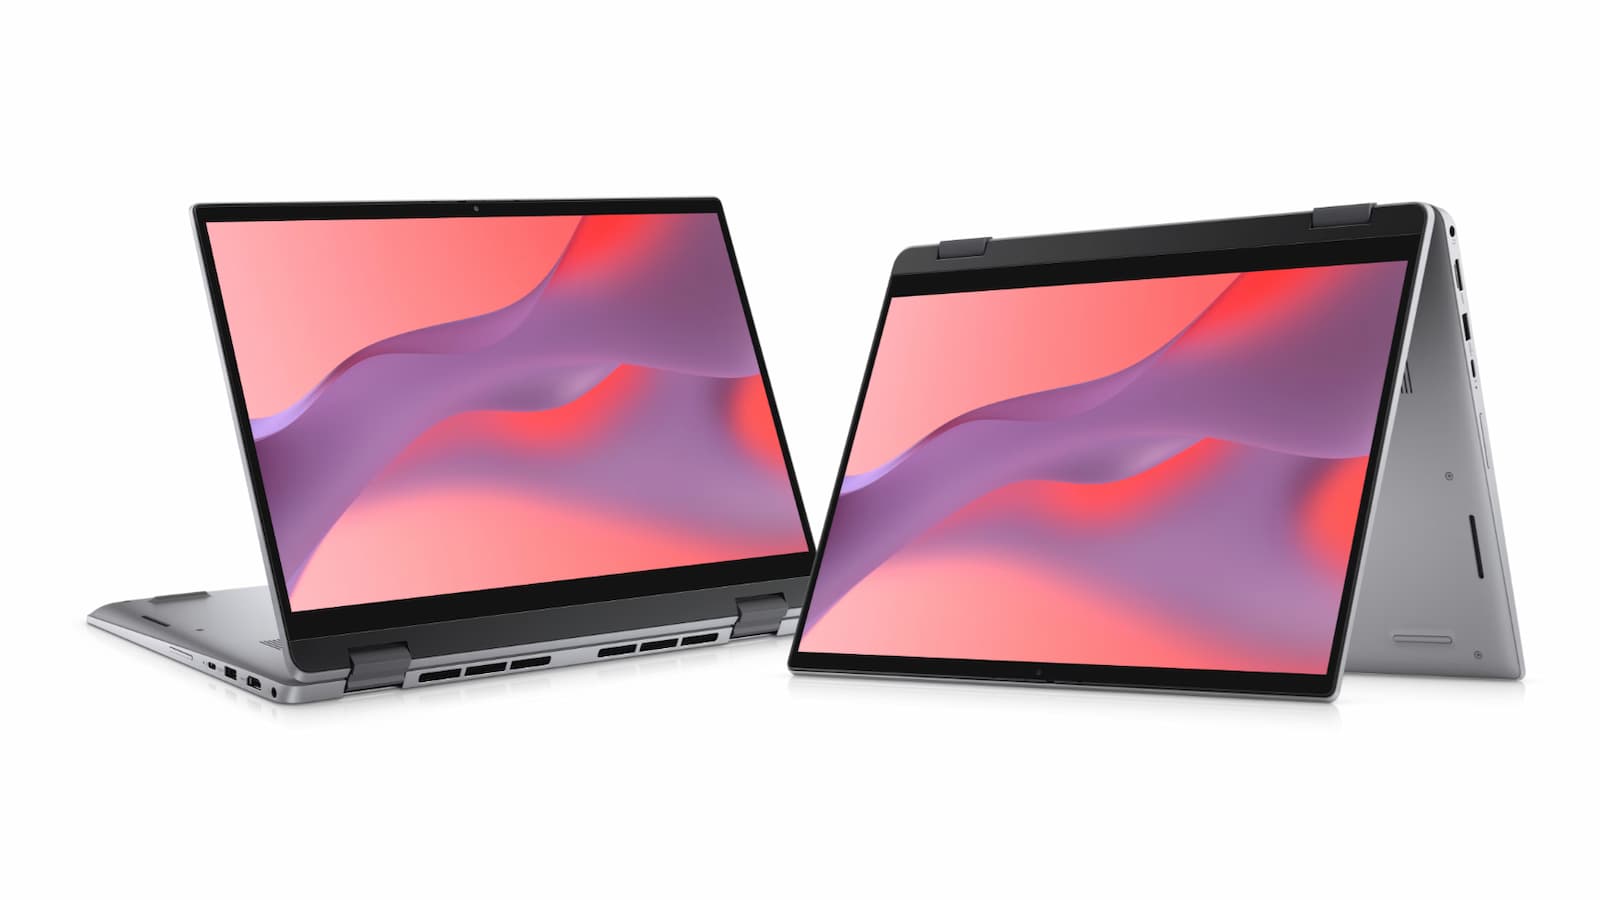 You can now order the premium Dell Latitude 5430 Chromebook